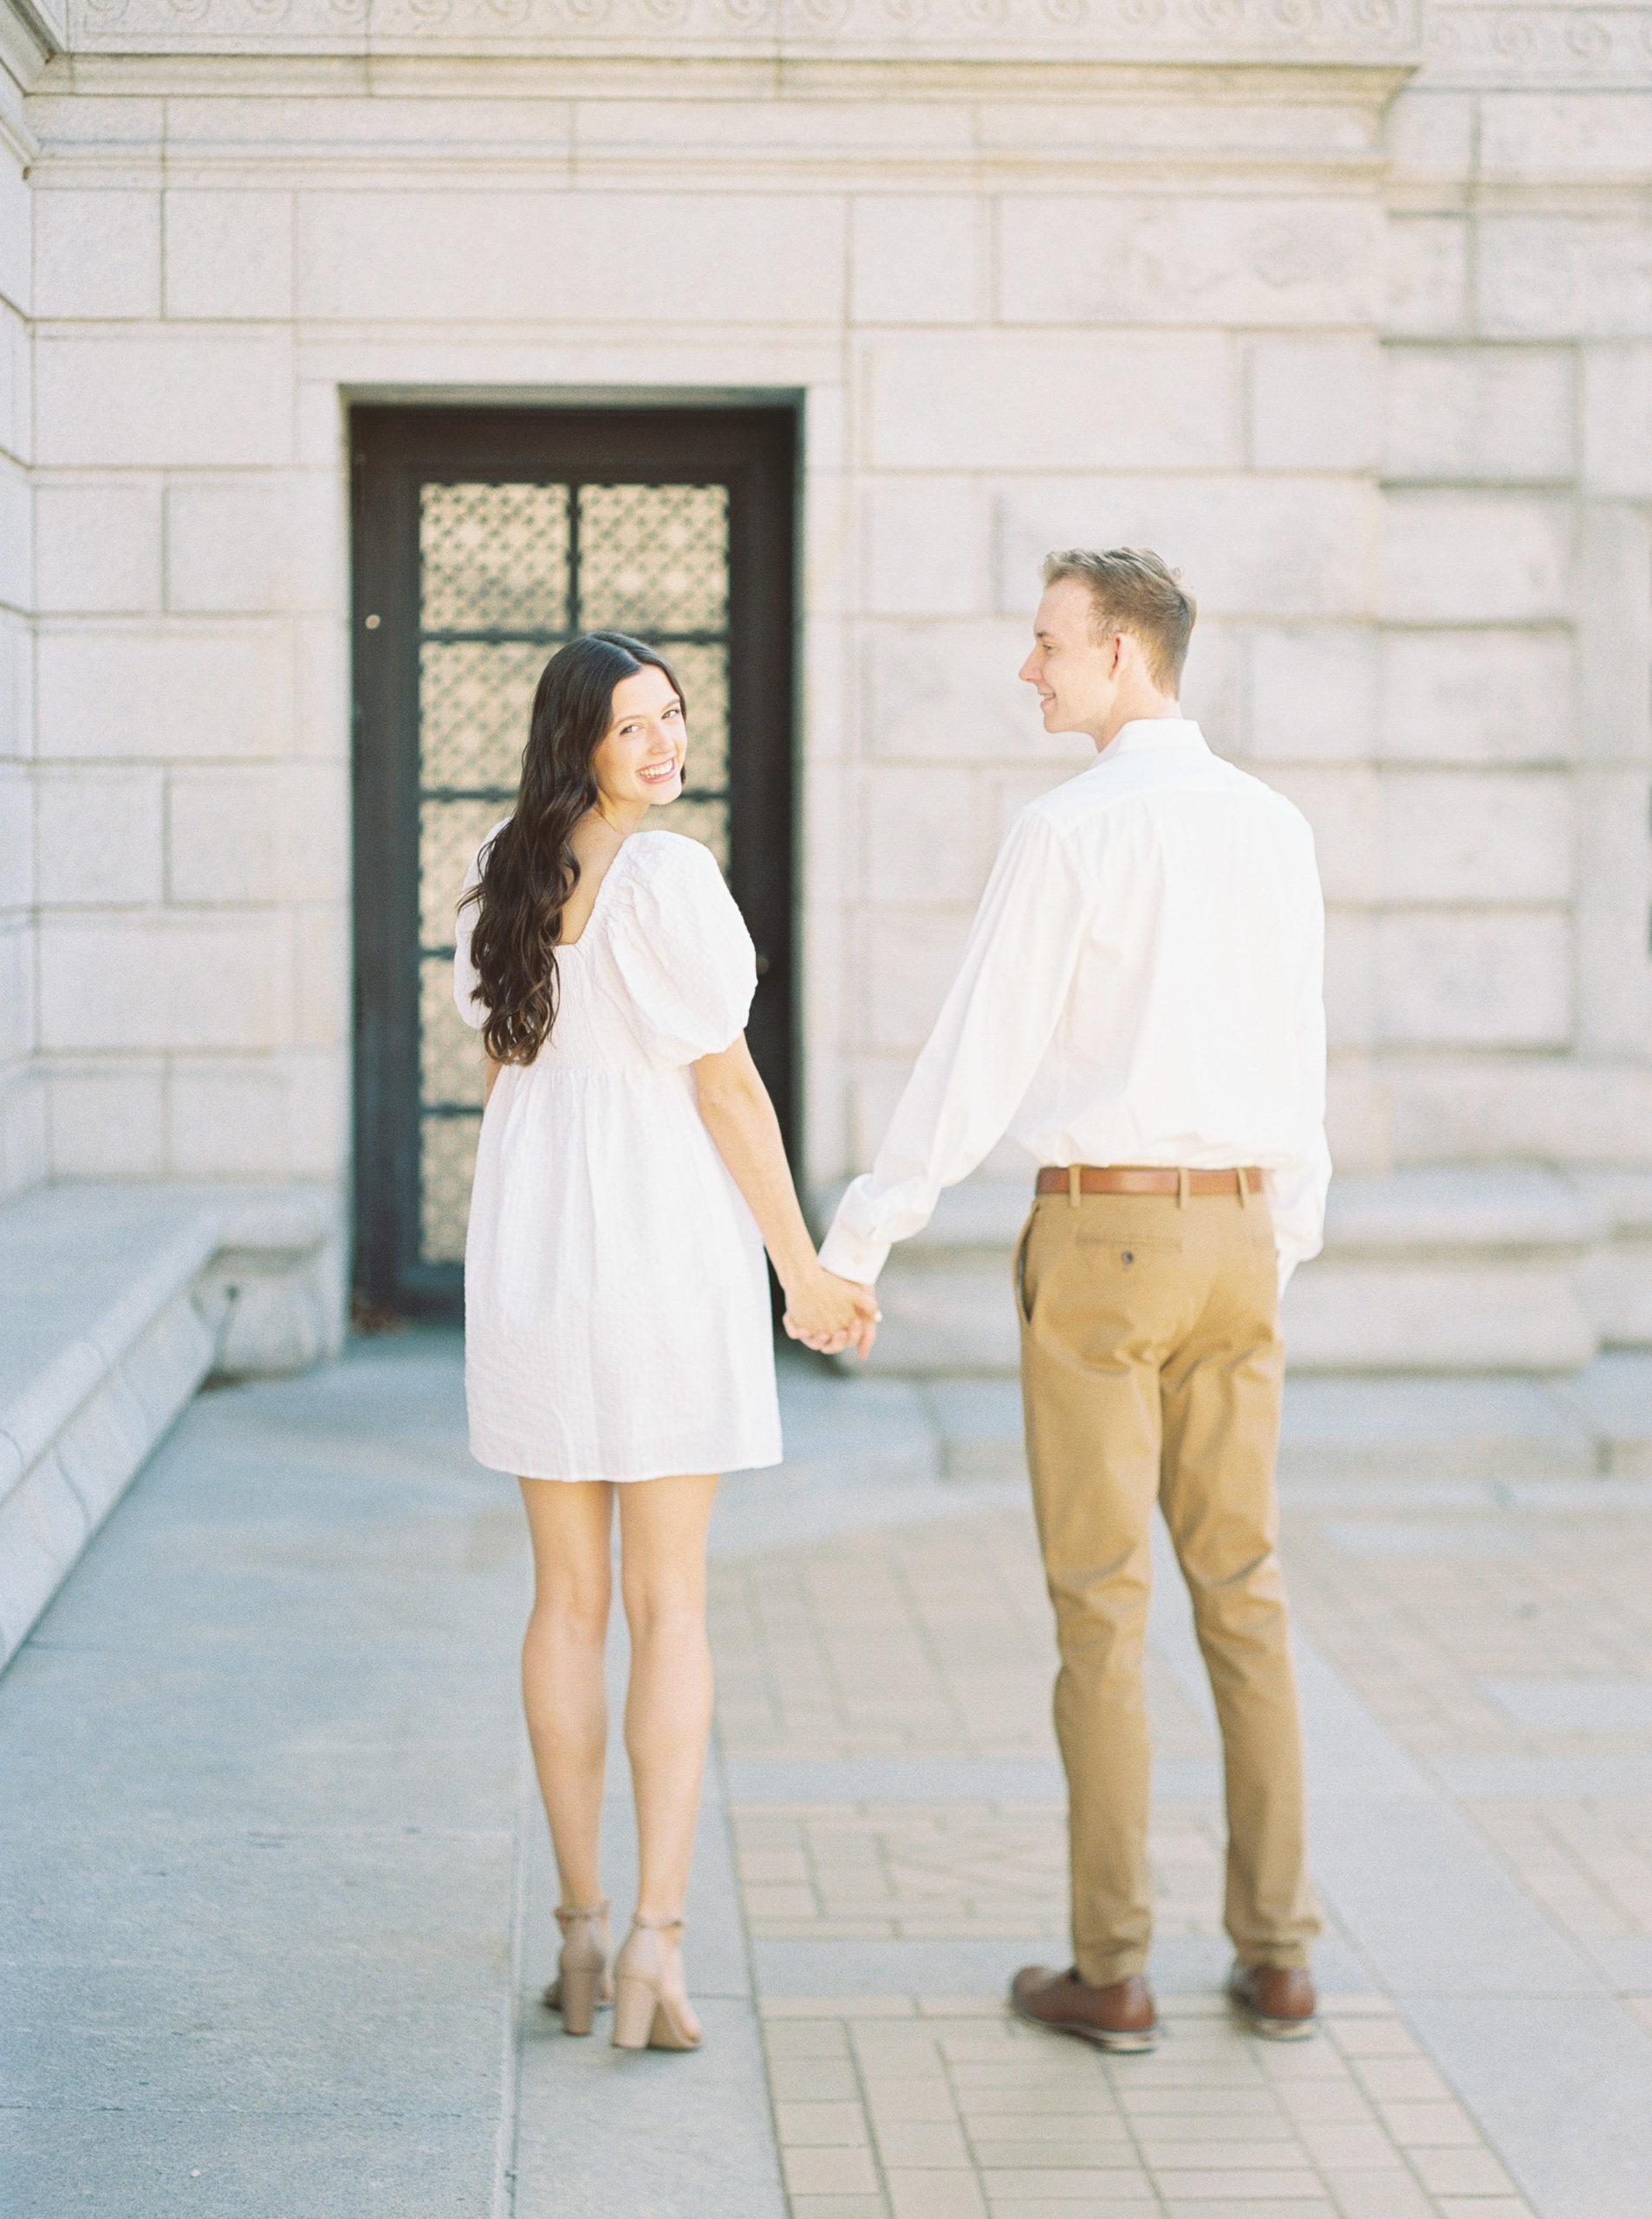 St Louis Central Library and spring floral fine art engagement session on film